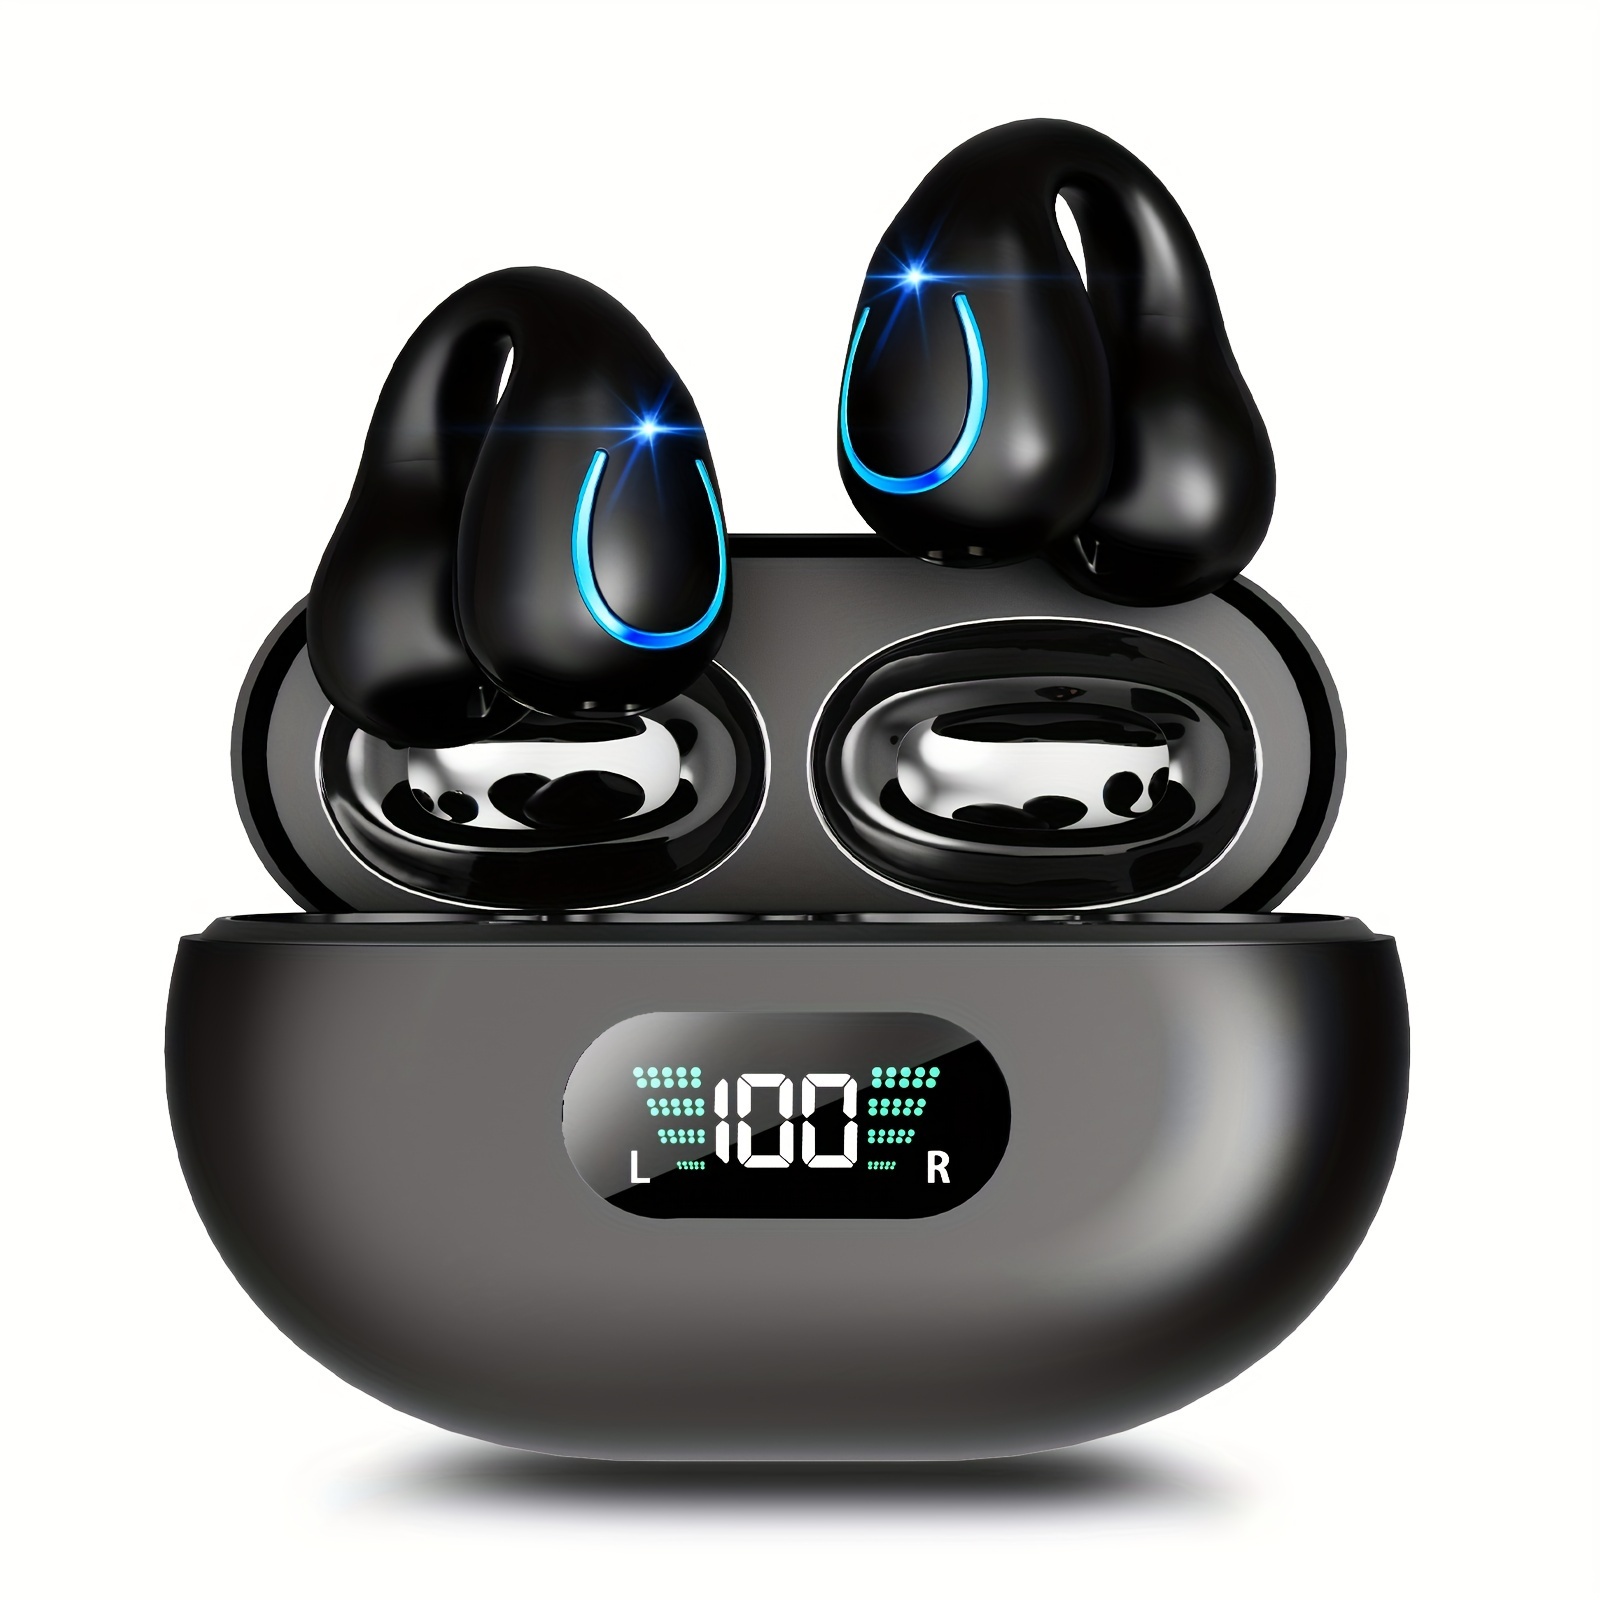 

Open Ear Clip Wireless Earbuds Earphones, With Led Digital Display Charging Case, Offering High-definition Audio Quality For Calls Ows Stereo Earphones Earclip Headphones